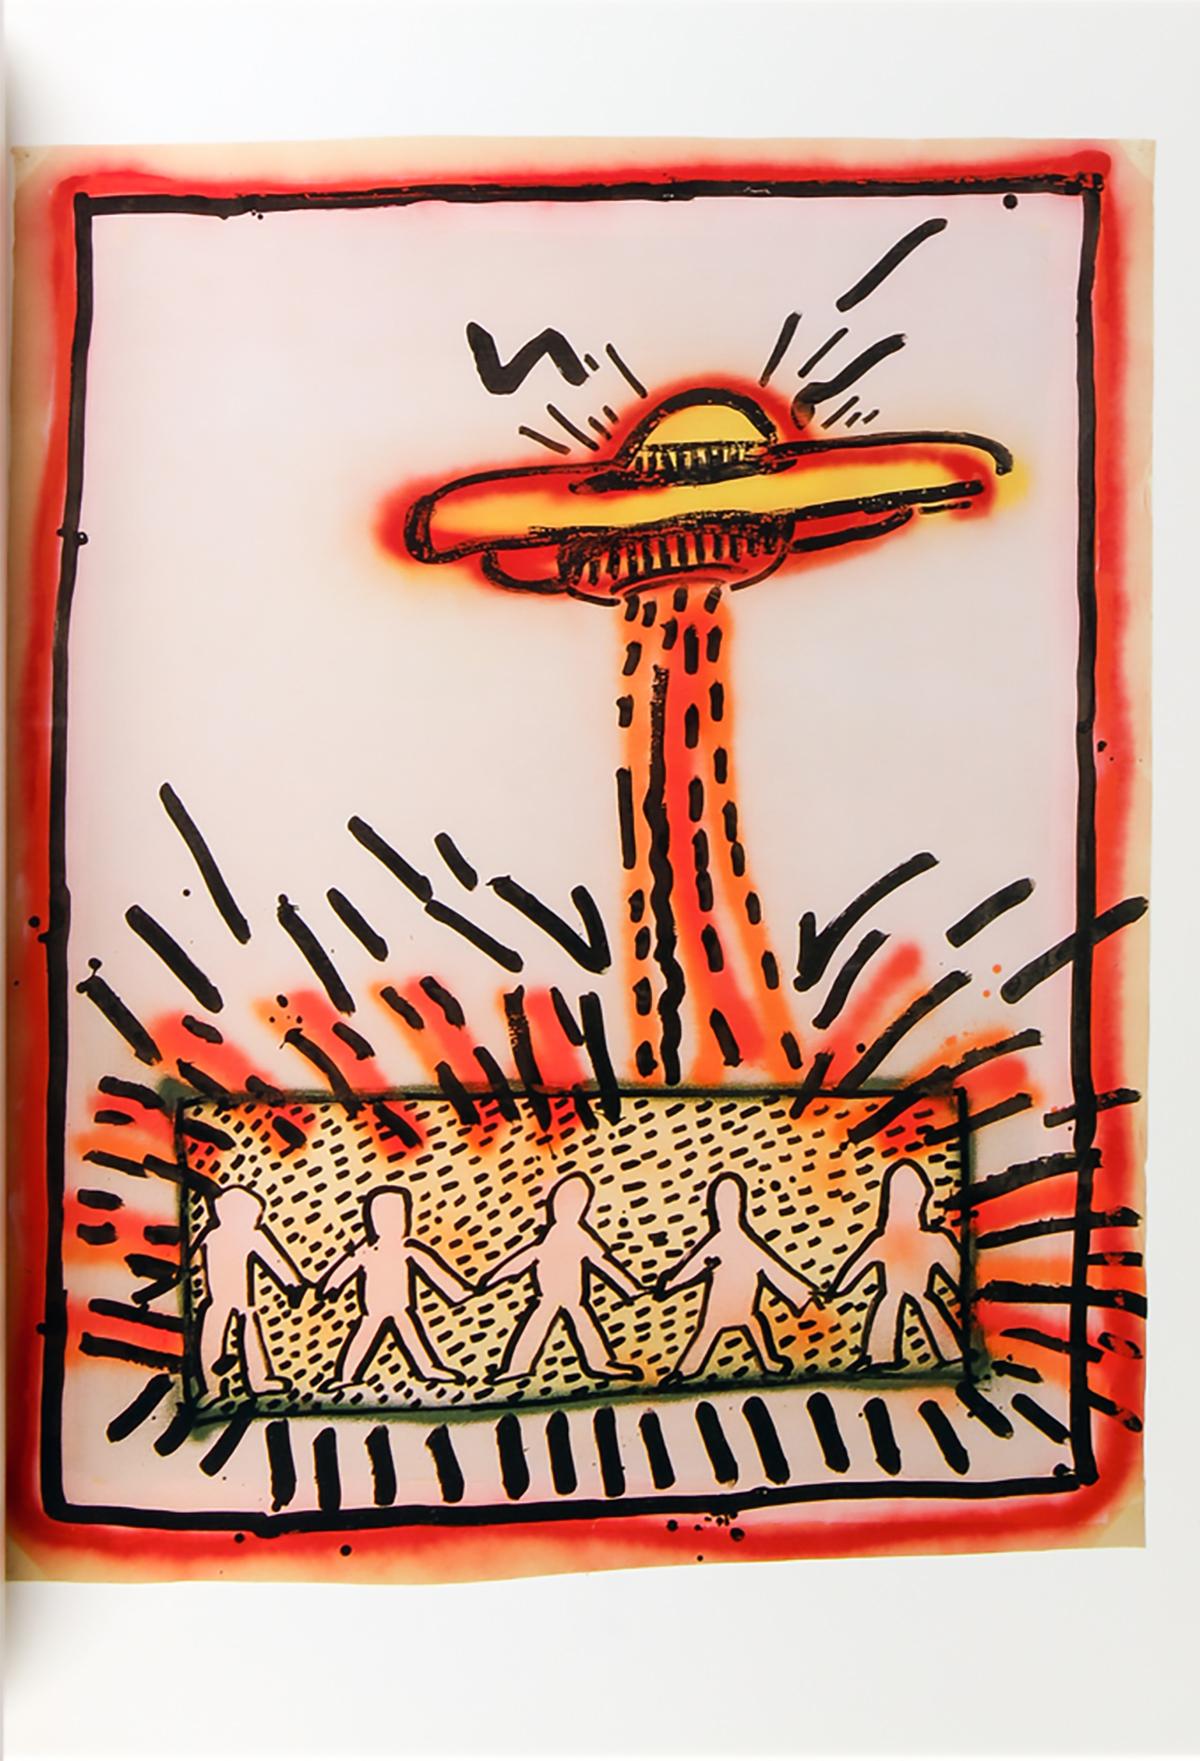 Keith Haring: A Memorial Exhibition: Early Works on Paper (May 4-June 2 1990):
Rare original limited edition 1990 exhibition catalog and gallery announcement card published in conjunction with a Keith Haring memorial exhibition held at Tony Shafrazi